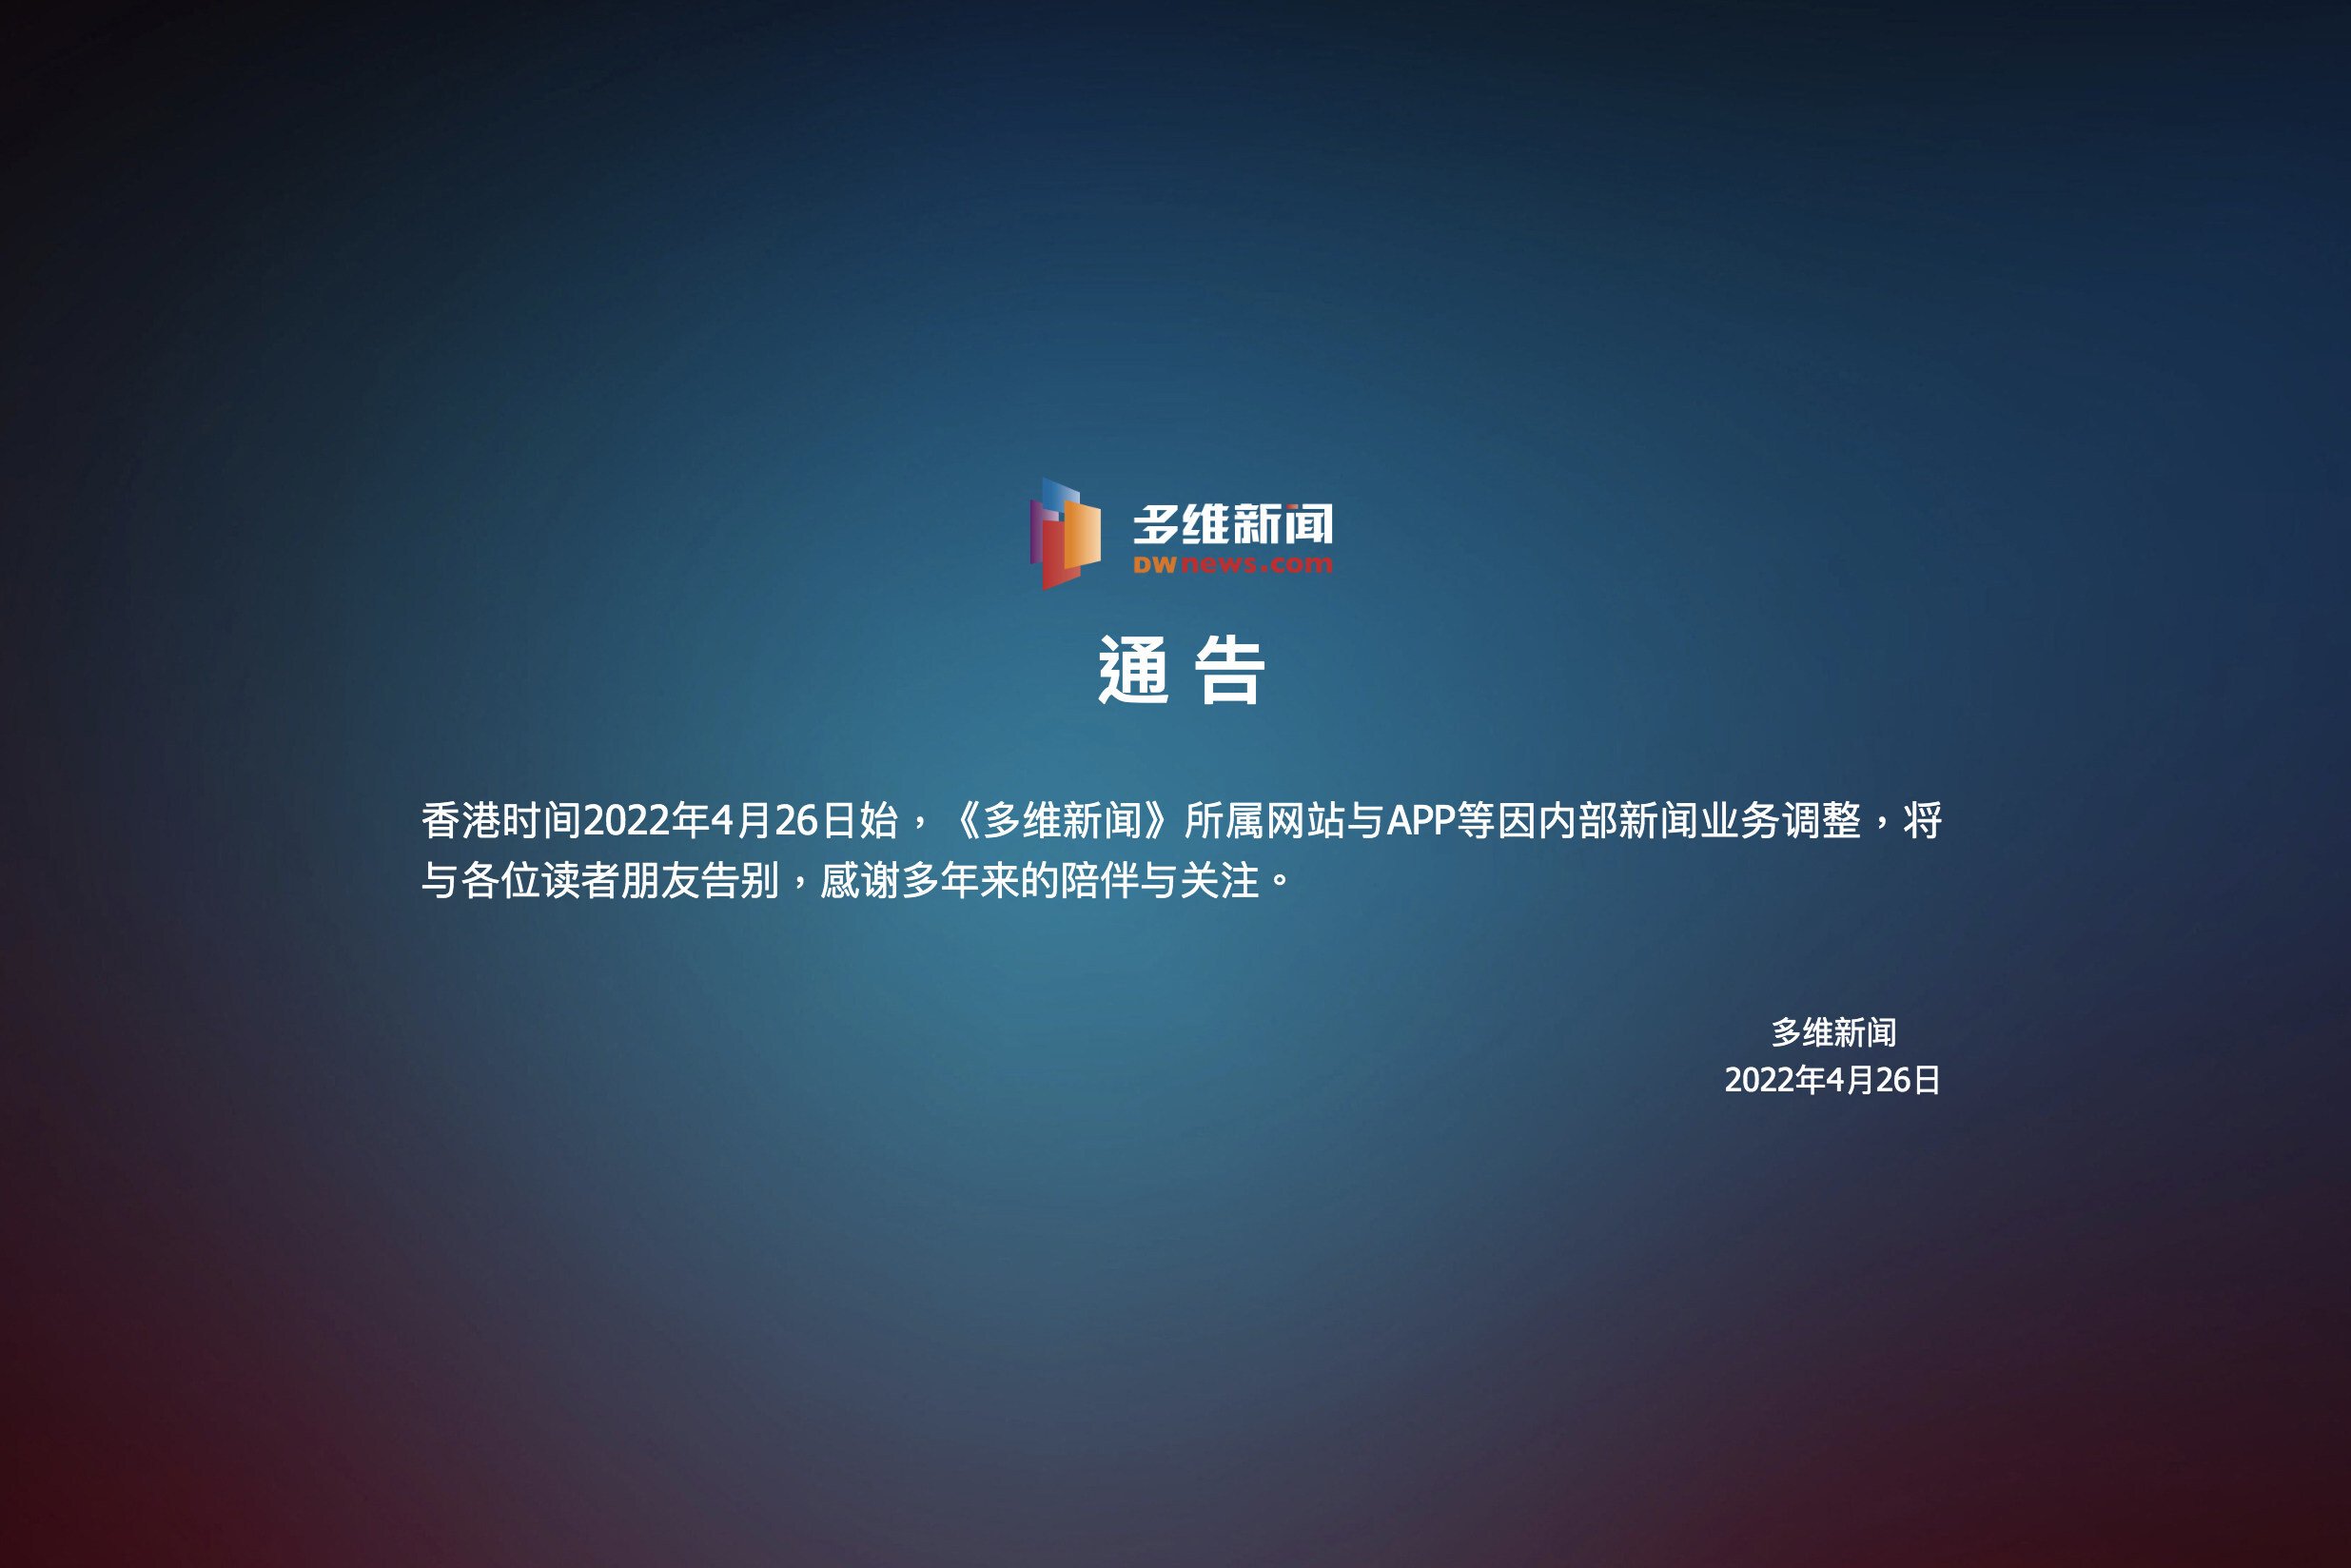 Chinese news portal Duowei News has closed its website and mobile app, citing operational changes. Photo: Handout